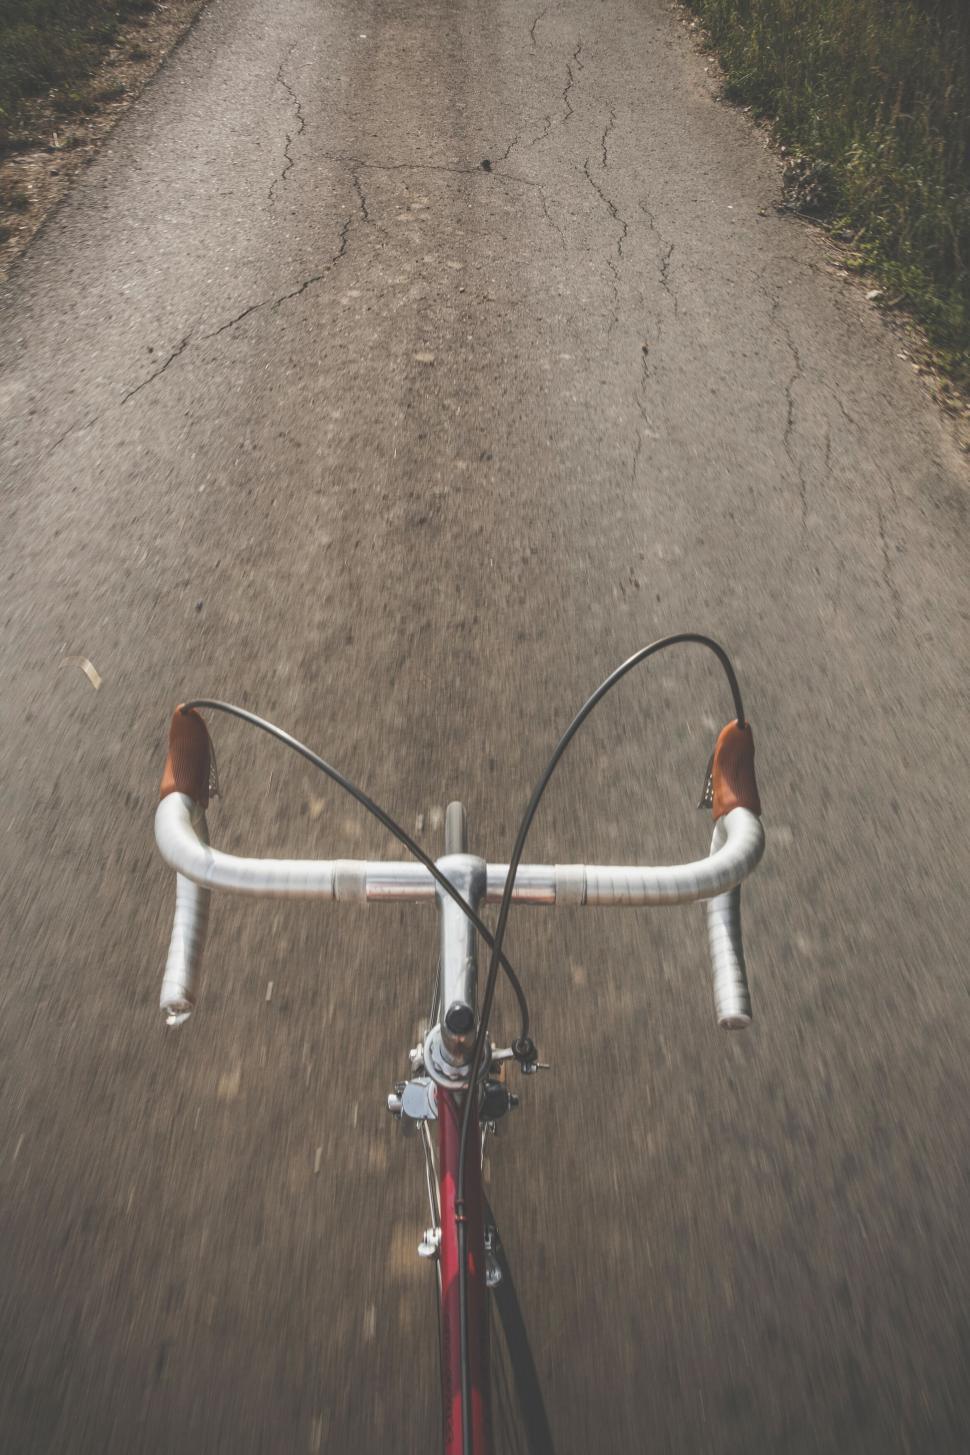 Free Image of POV of bike riding on a country road 